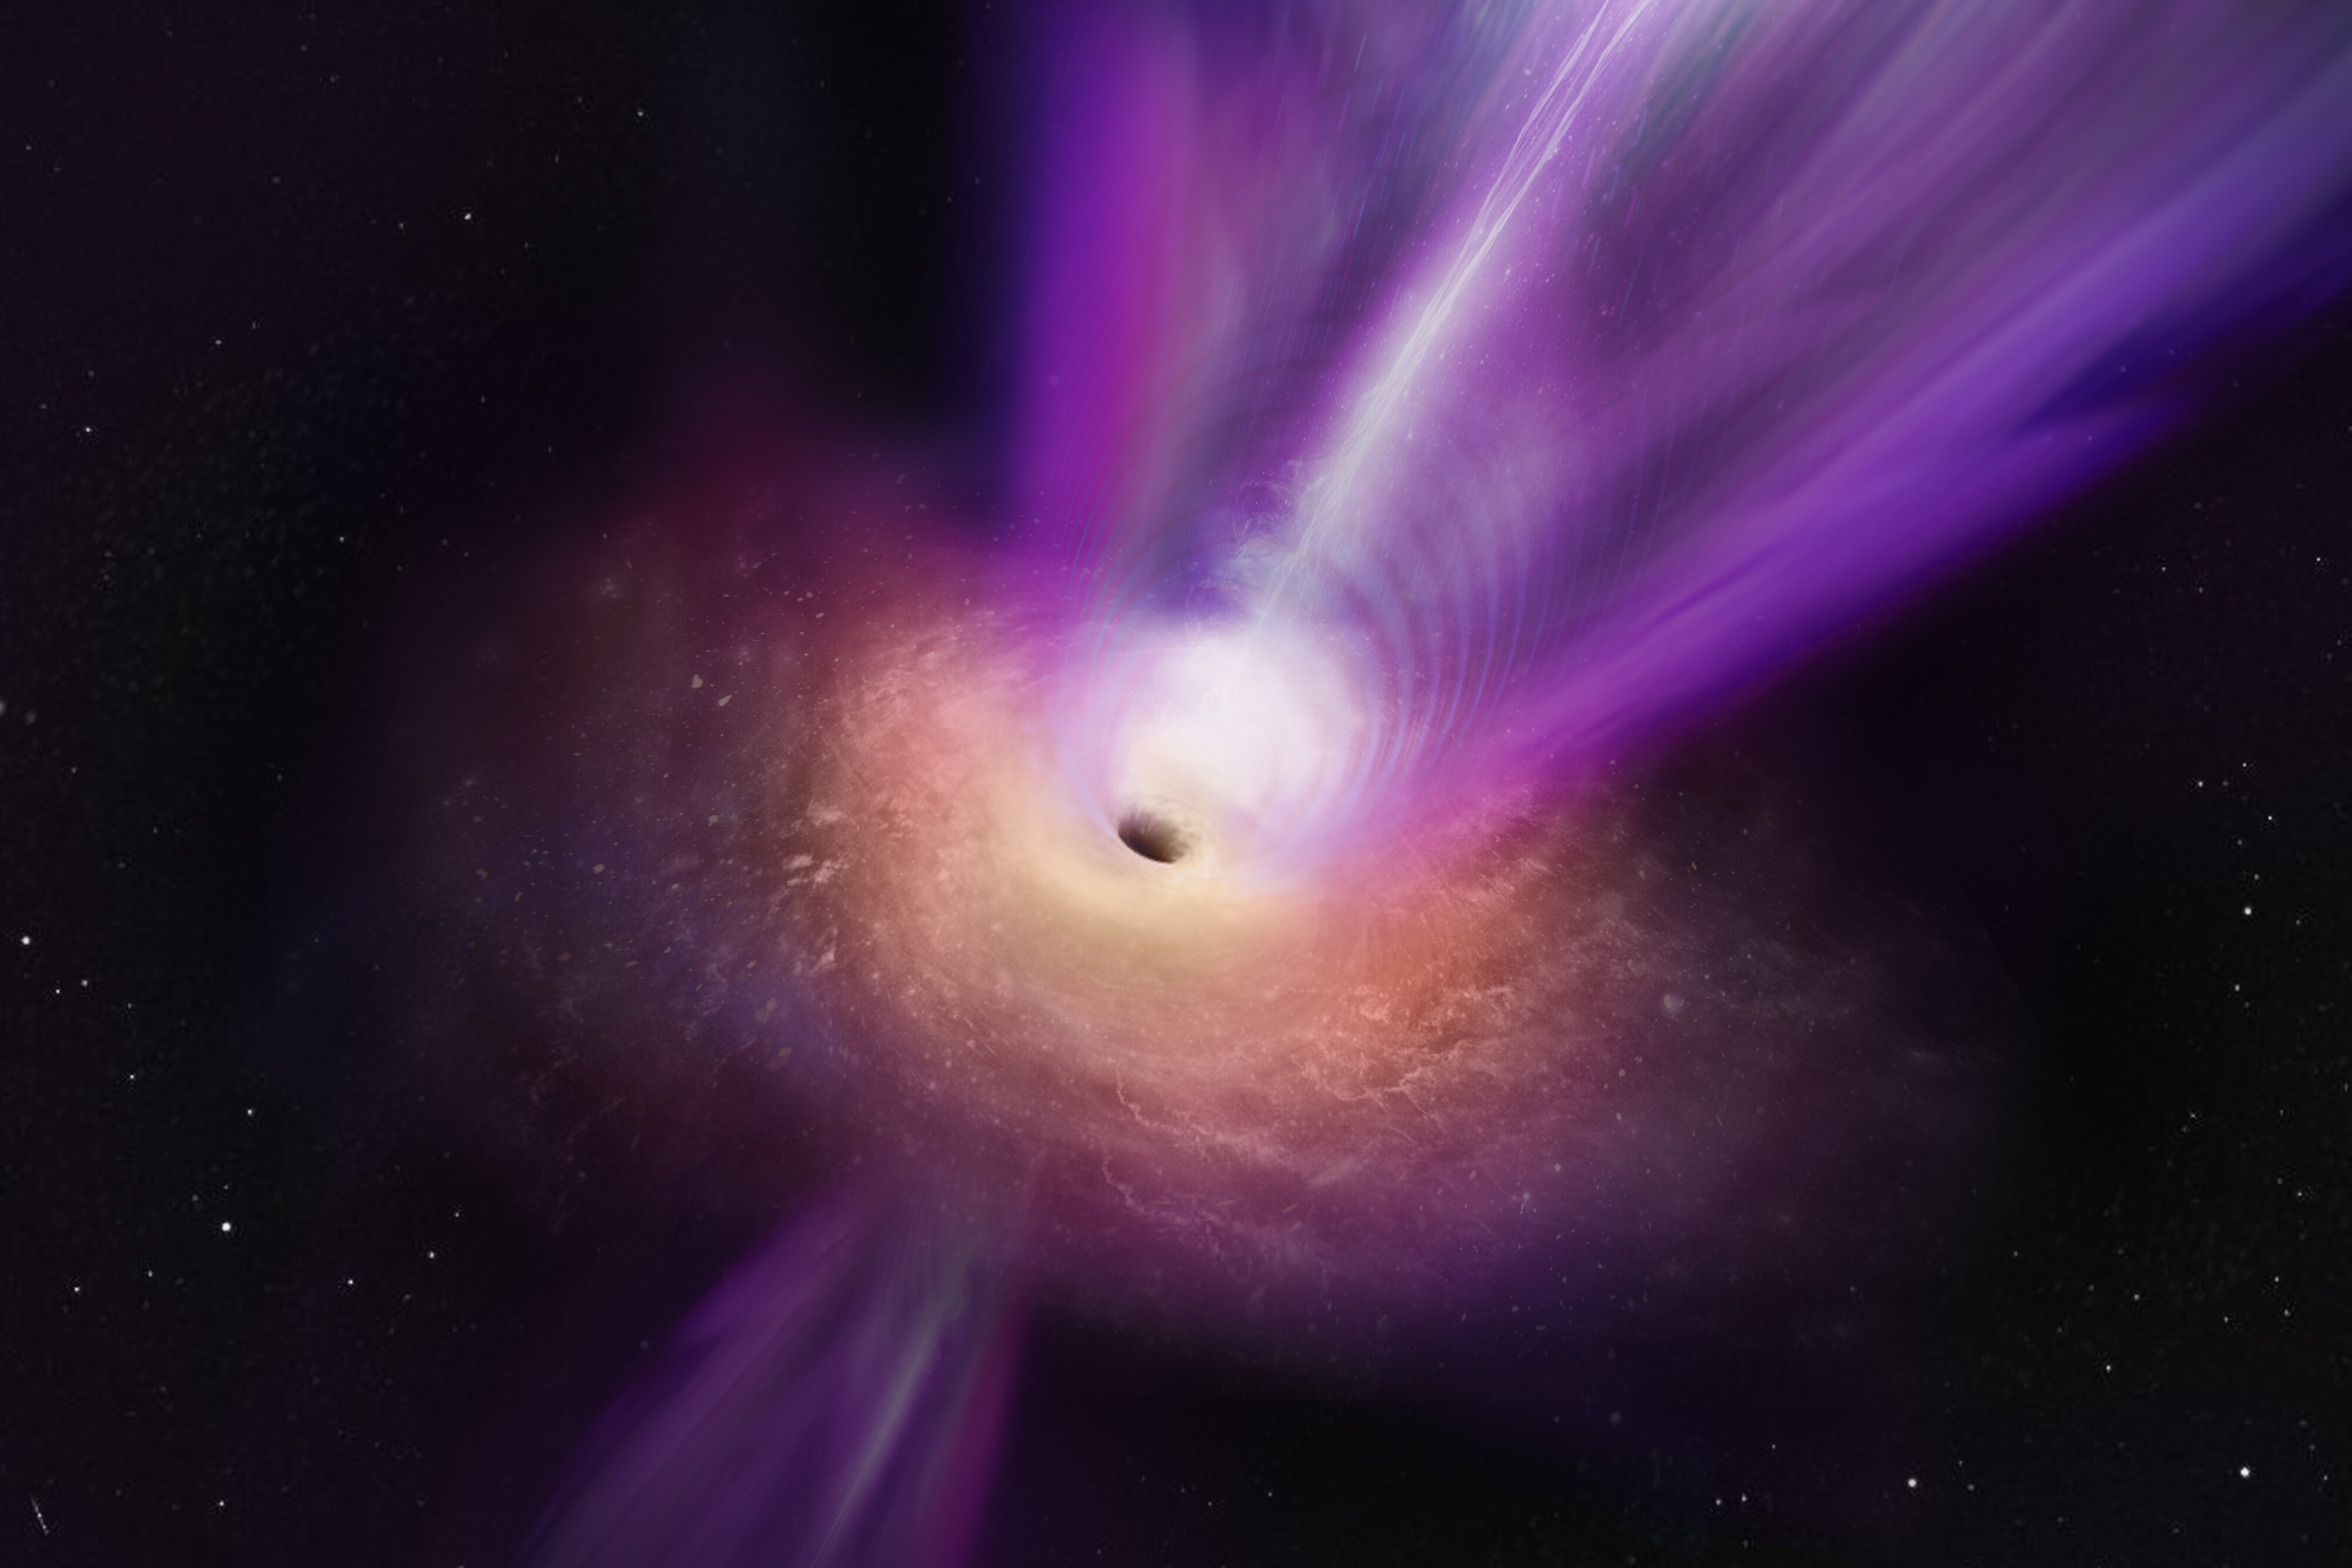 An artist's impression of the supermassive black hole in the galaxy M87 and its powerful jet.